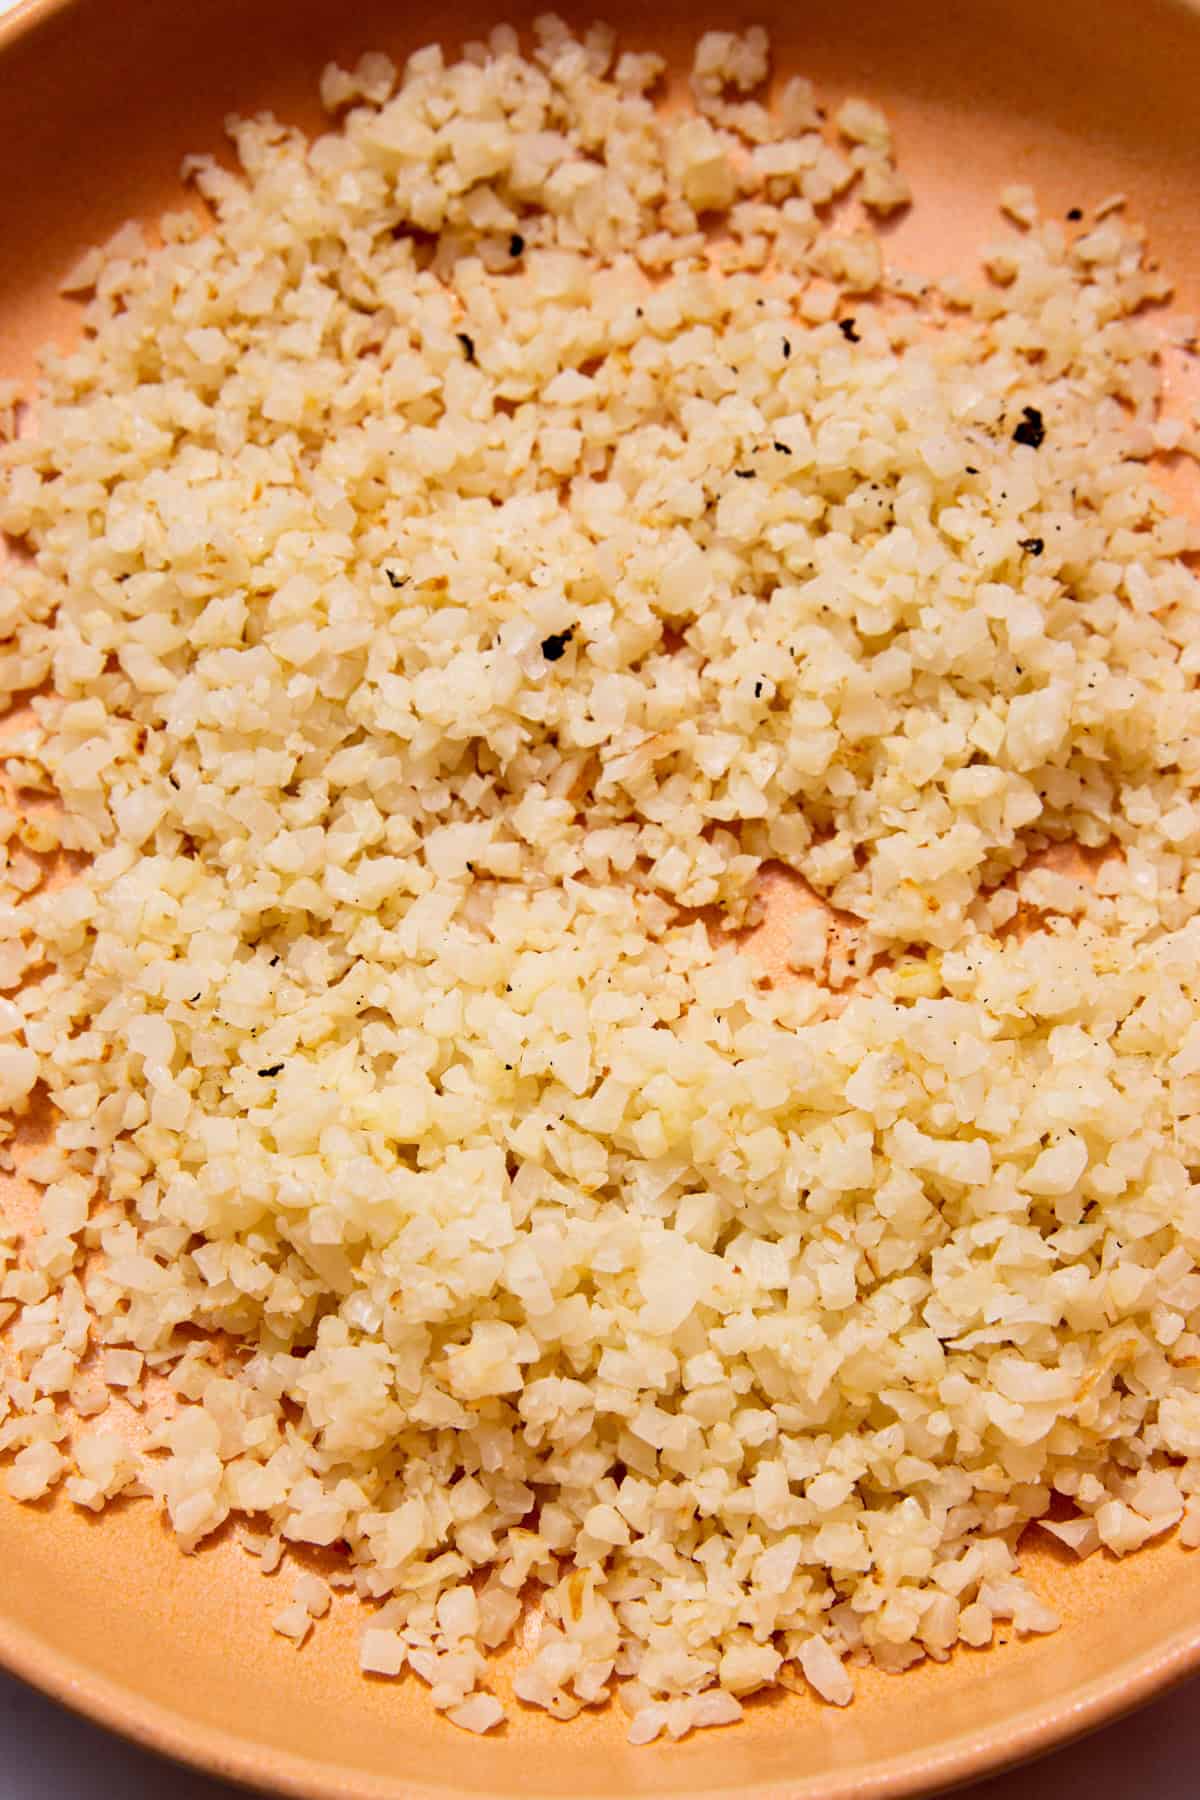 A pale tanned coloured bowl with cauliflower rice.